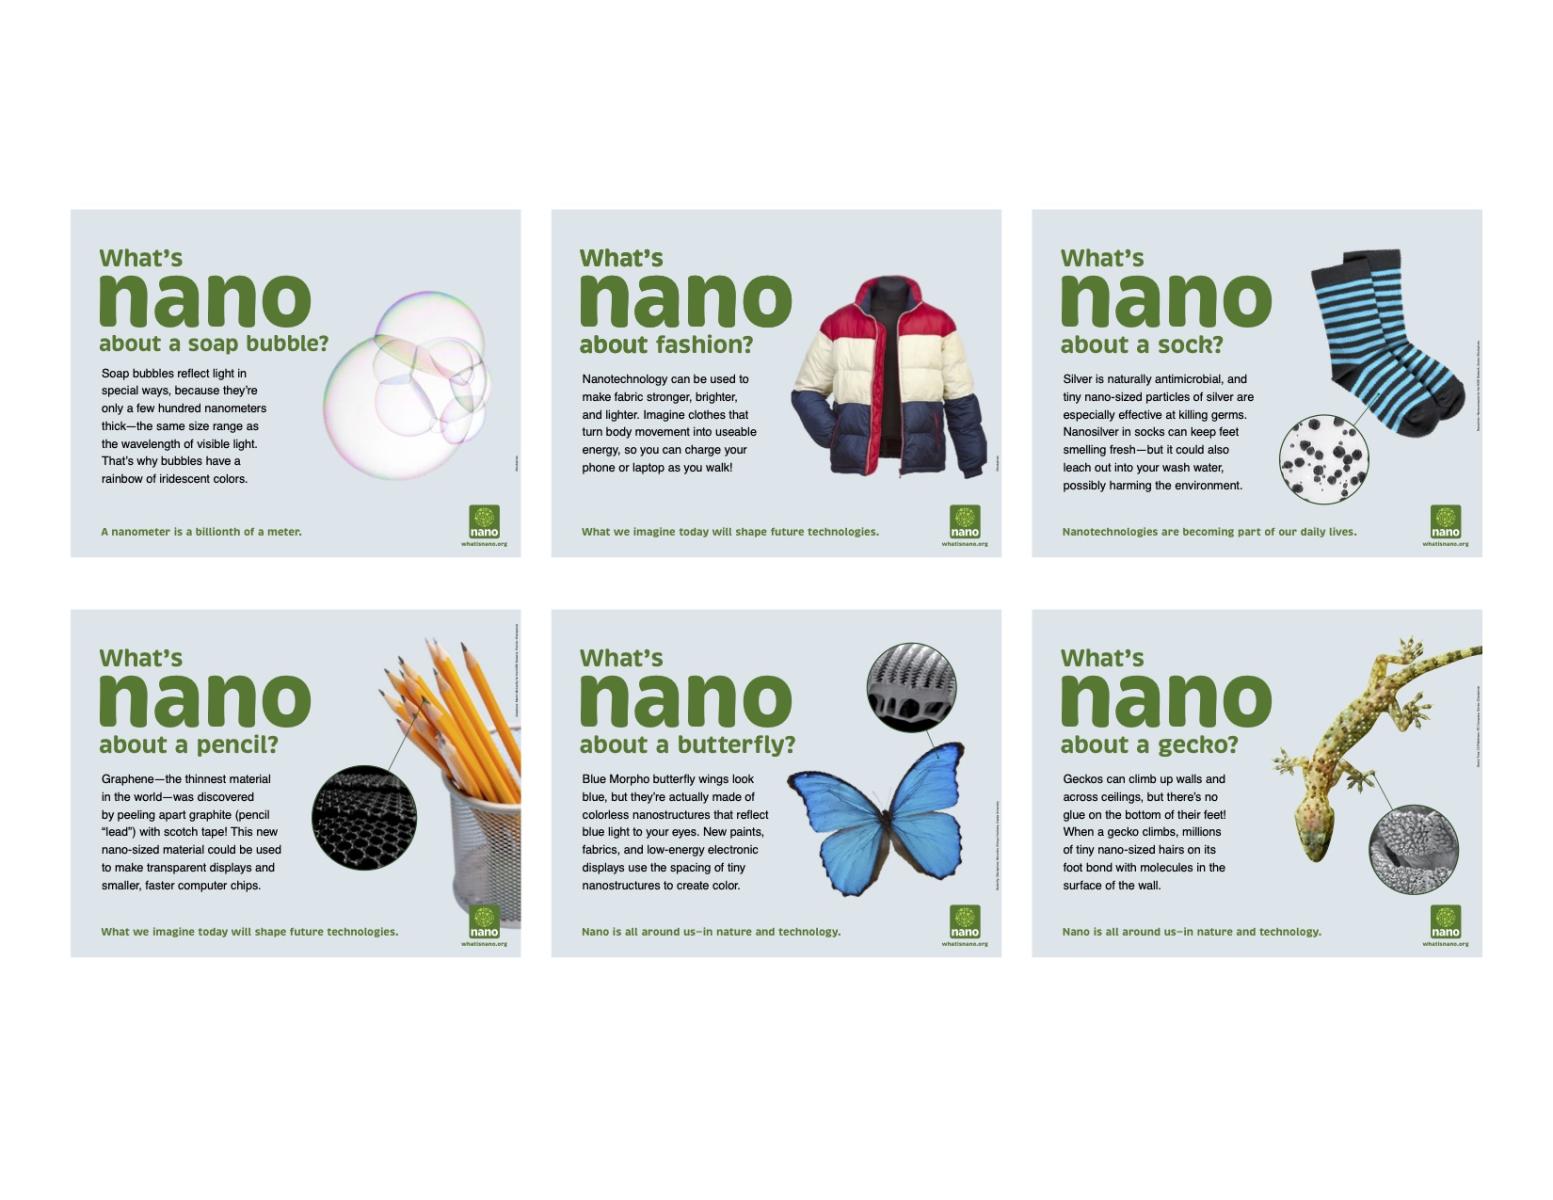 What is nano about museum labels thumbnails of signs featuring signs of bubbles,, a jacket, socks, a butterfly, and a gecko